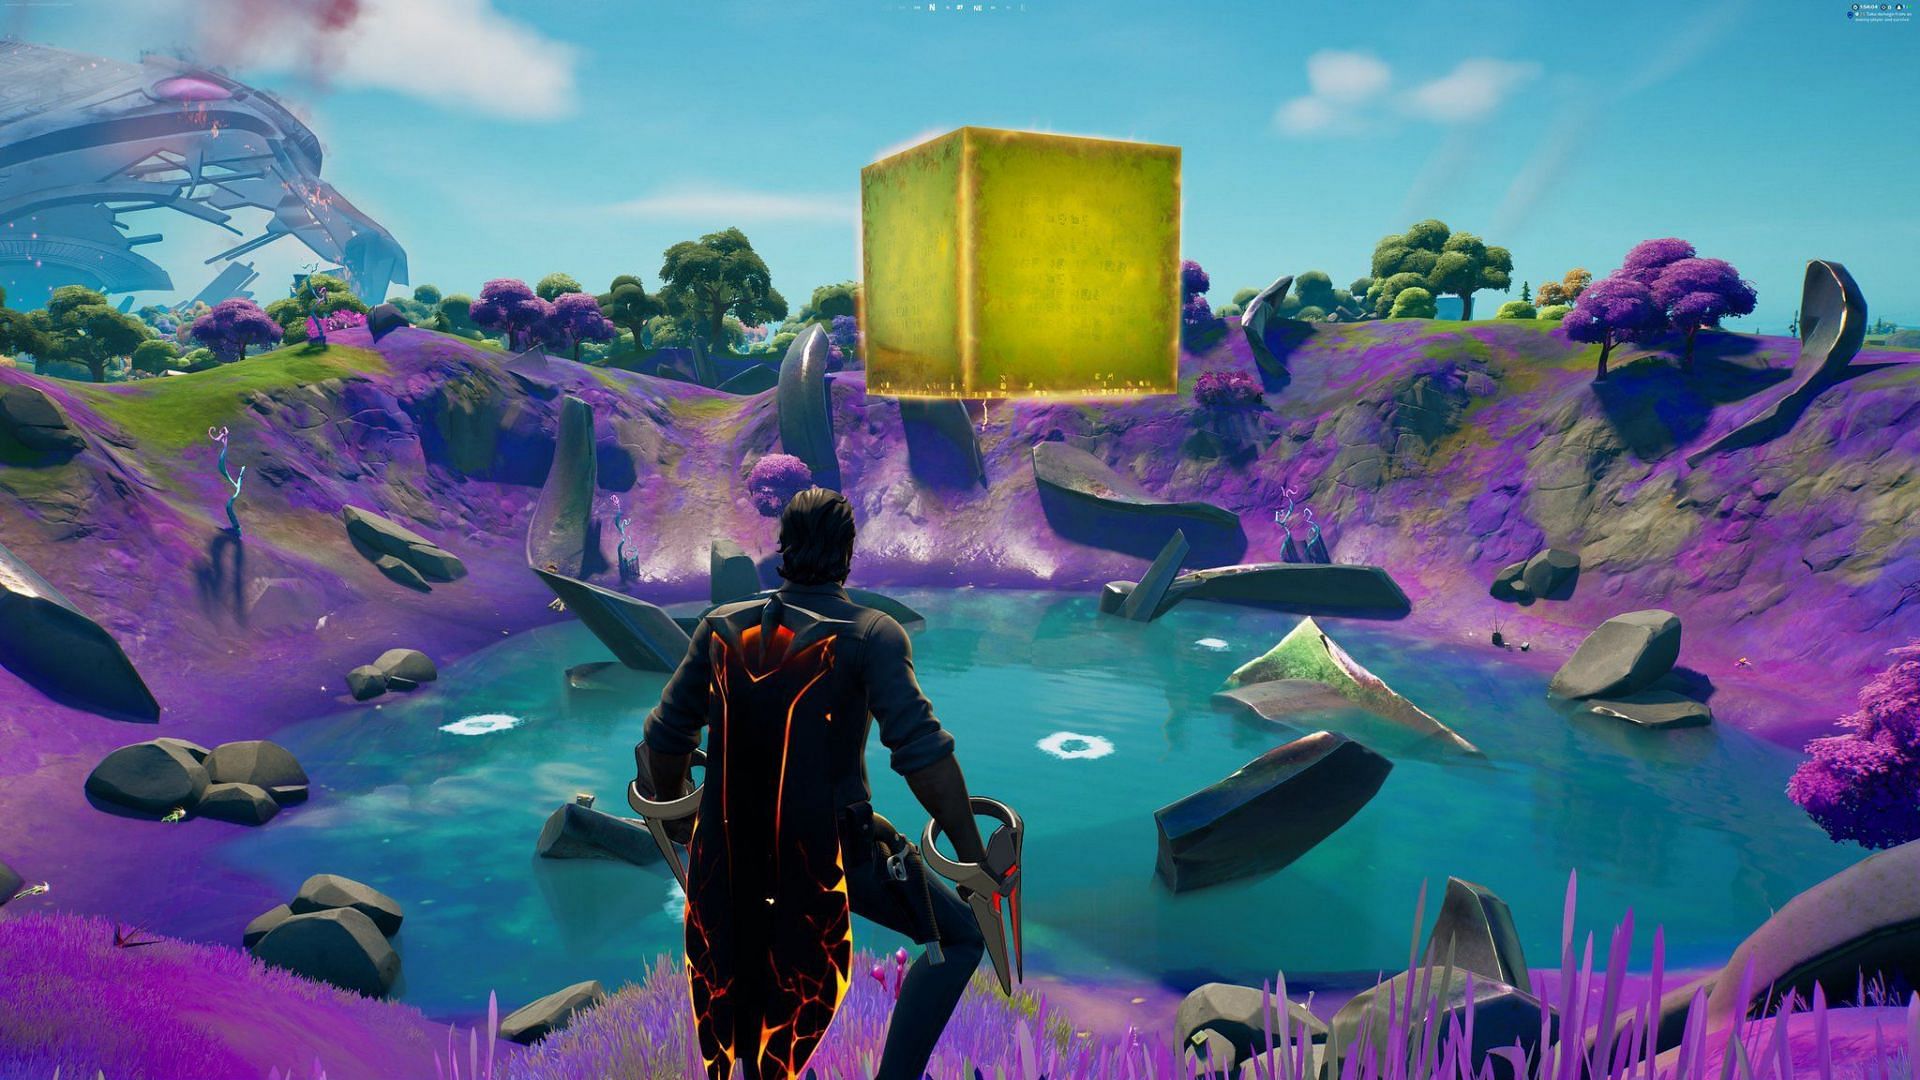 Glevin, the Golden Cube in Fortnite, has reached the Aftermath (Image via Twitter/GhostOpsFN)